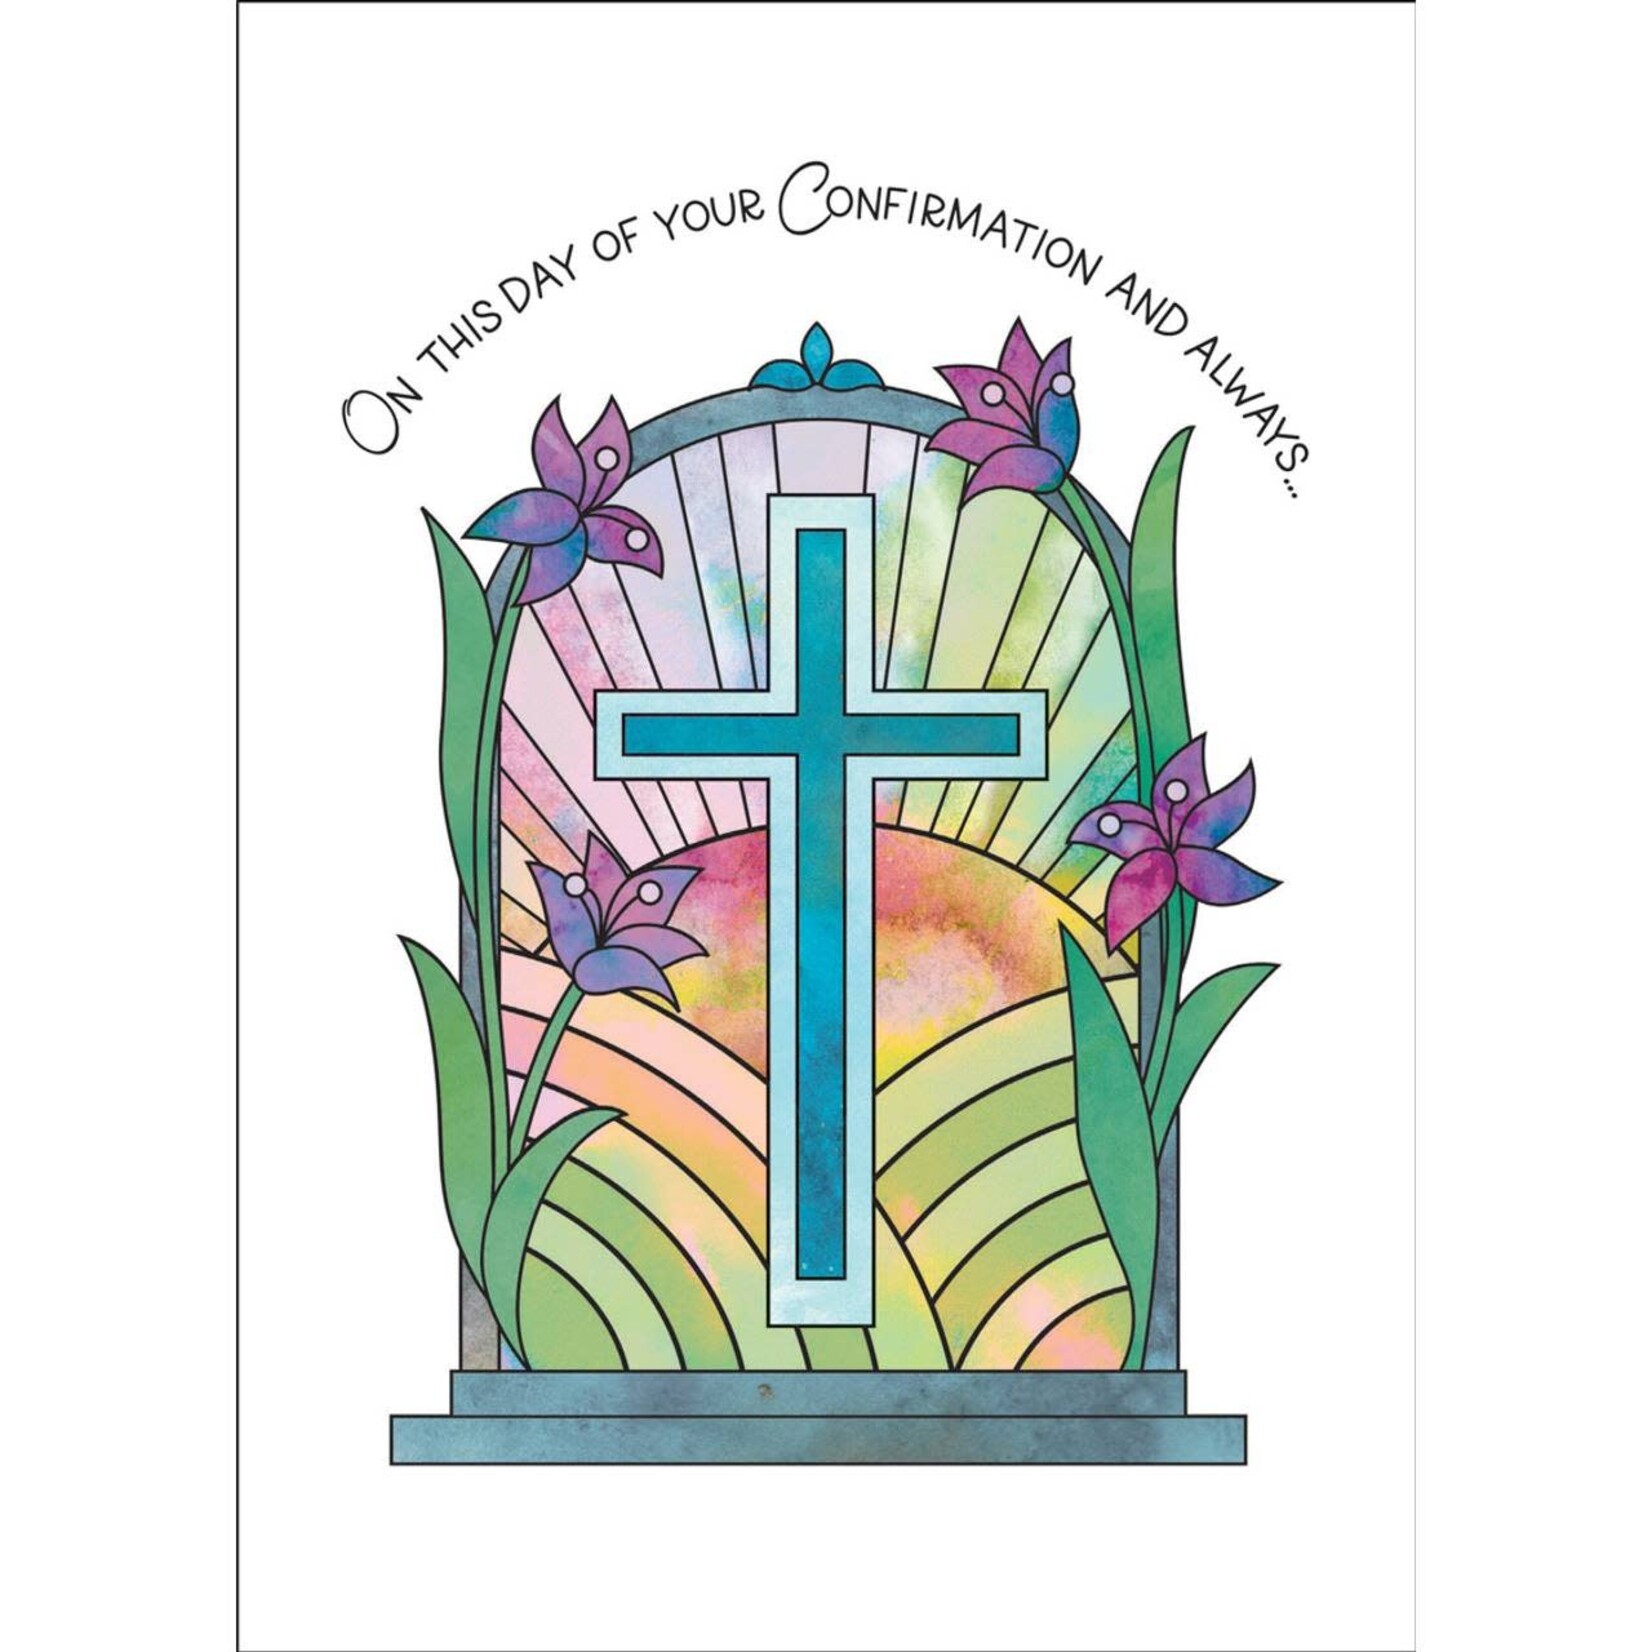 It Takes Two - 5x7" Greeting Card - Confirmation - On This Day of Your Confirmation